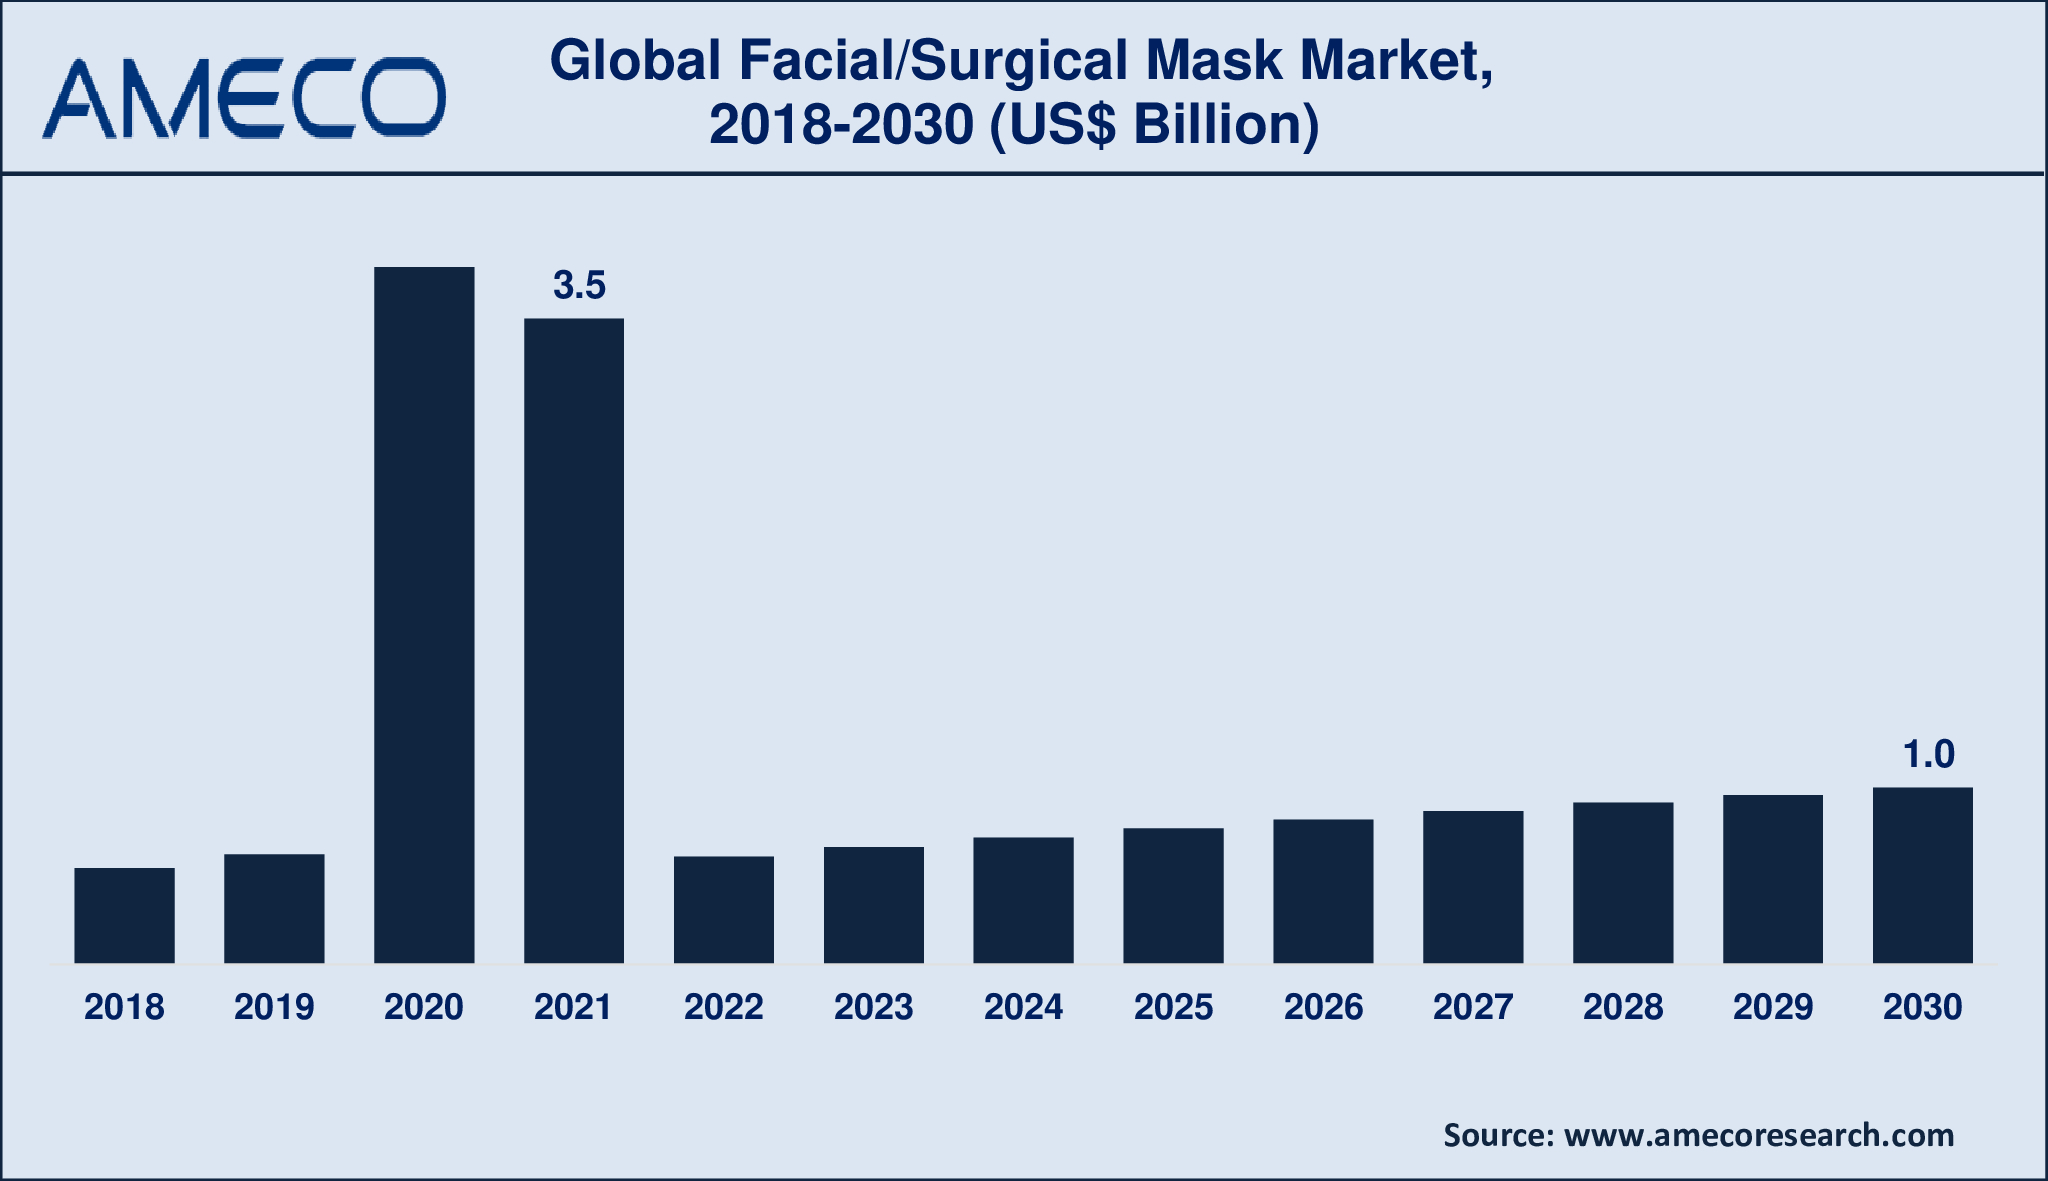 Facial/Surgical Mask Market Growth